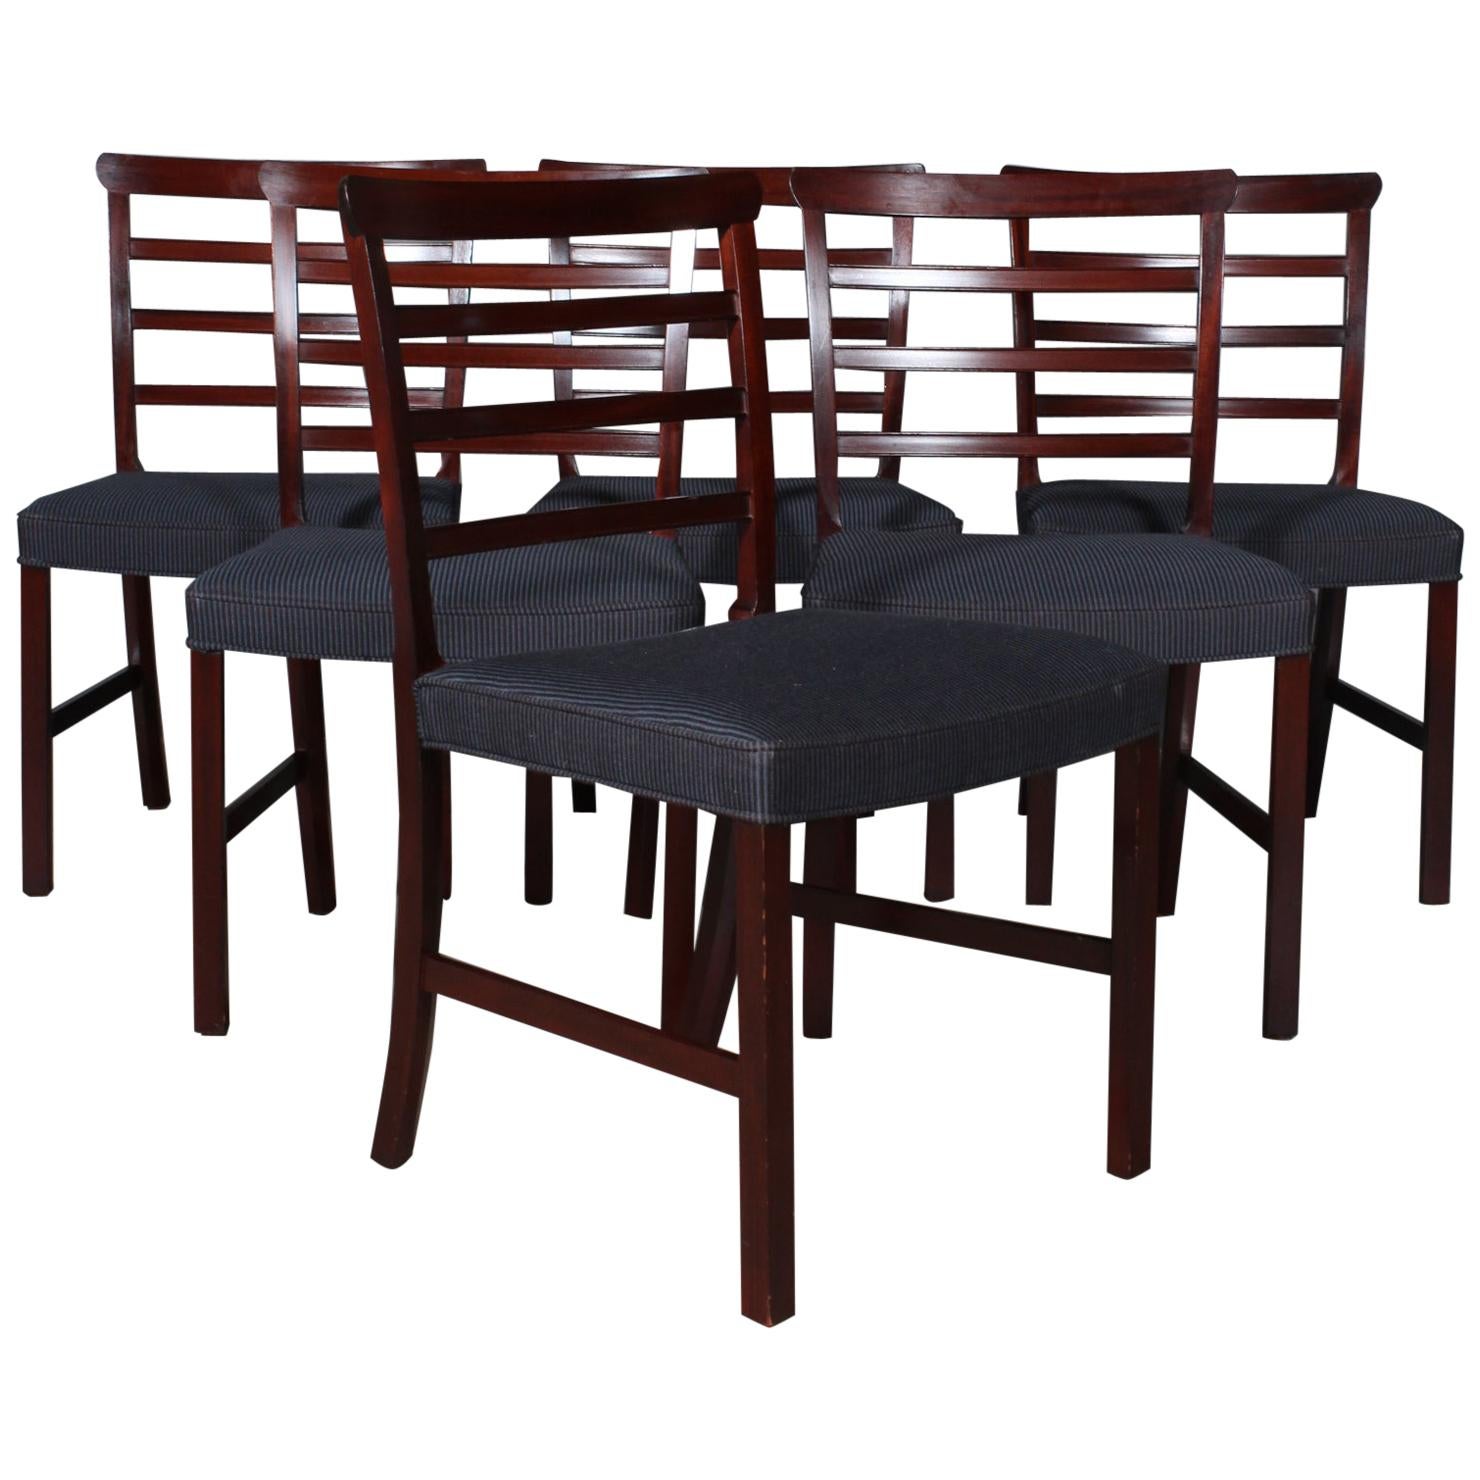 Ole Wanscher Six Dining Chairs